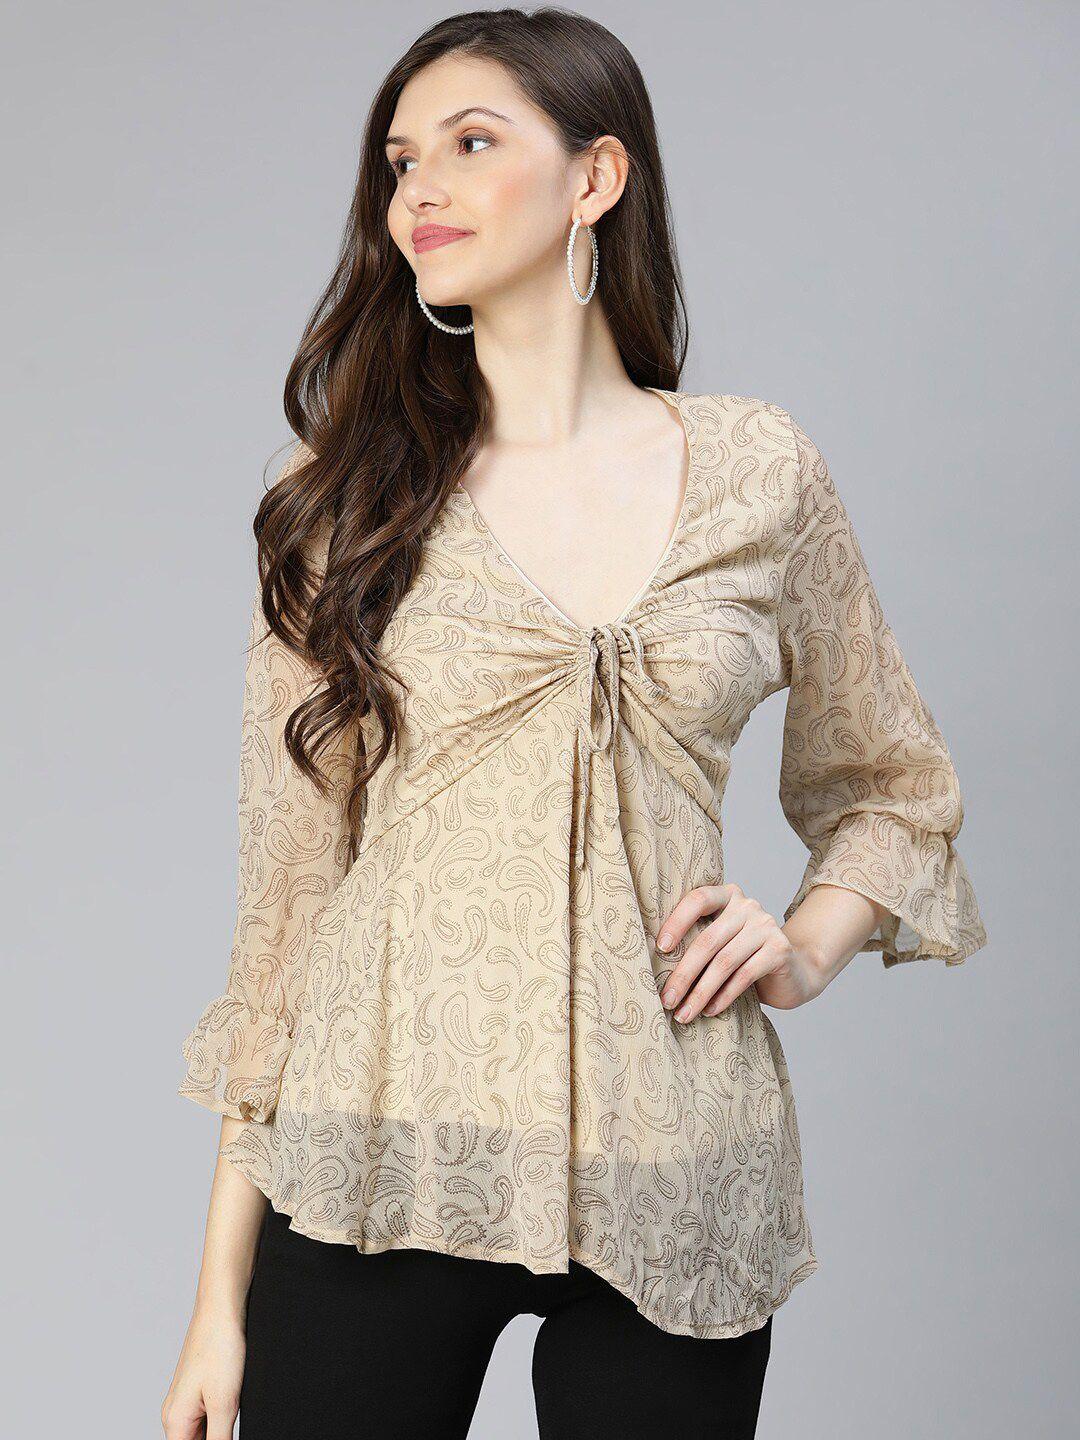 oxolloxo beige floral printed bell sleeves top